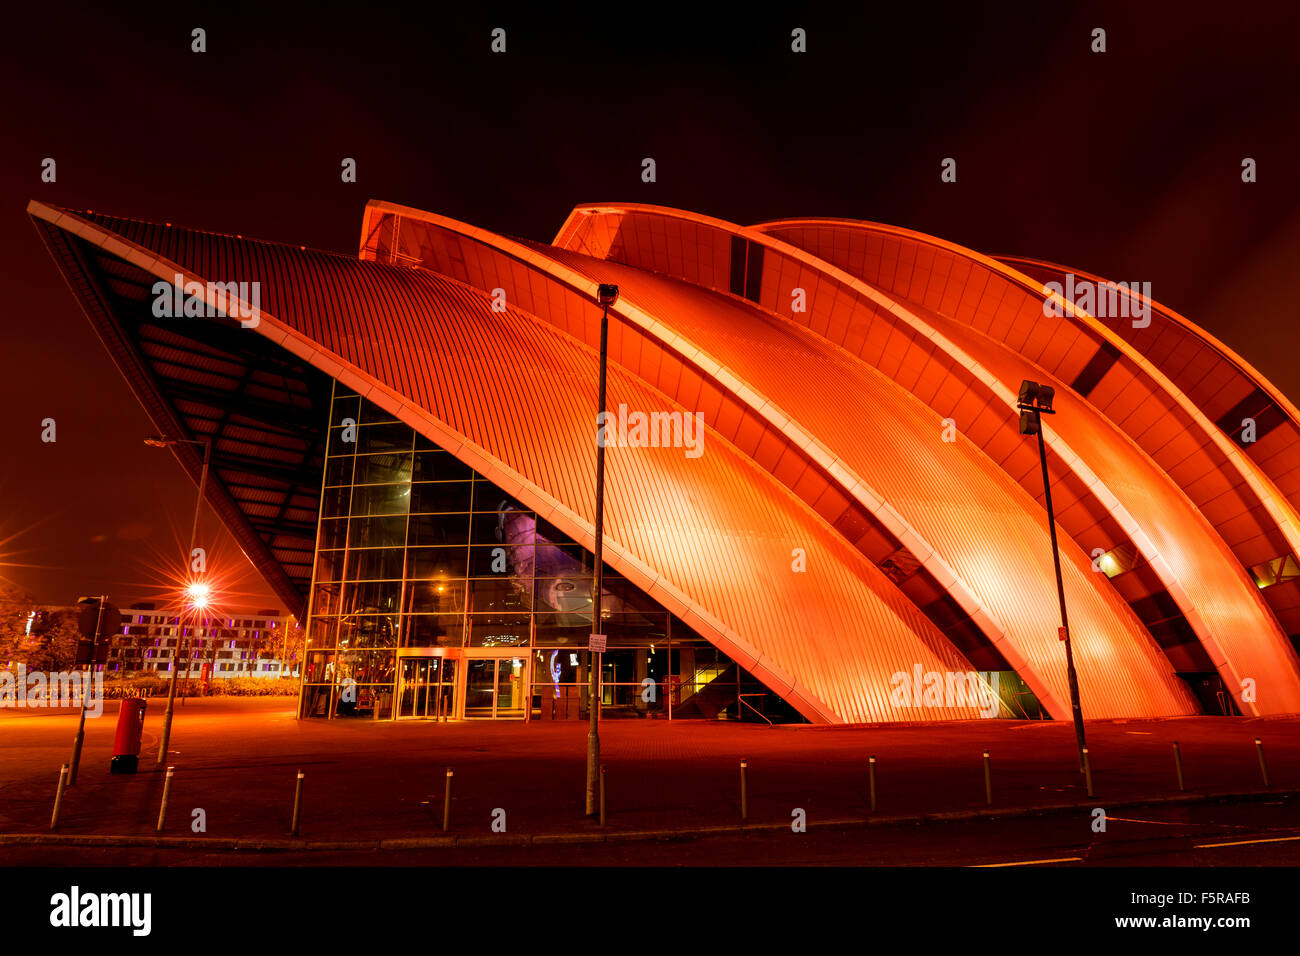 GLASGOW, SCOTLAND. OCTOBER 27 2015 : The Clyde Auditorium (Armadillo) Concert Hall on banks of River Clyde, Glasgow, Scotland Stock Photo